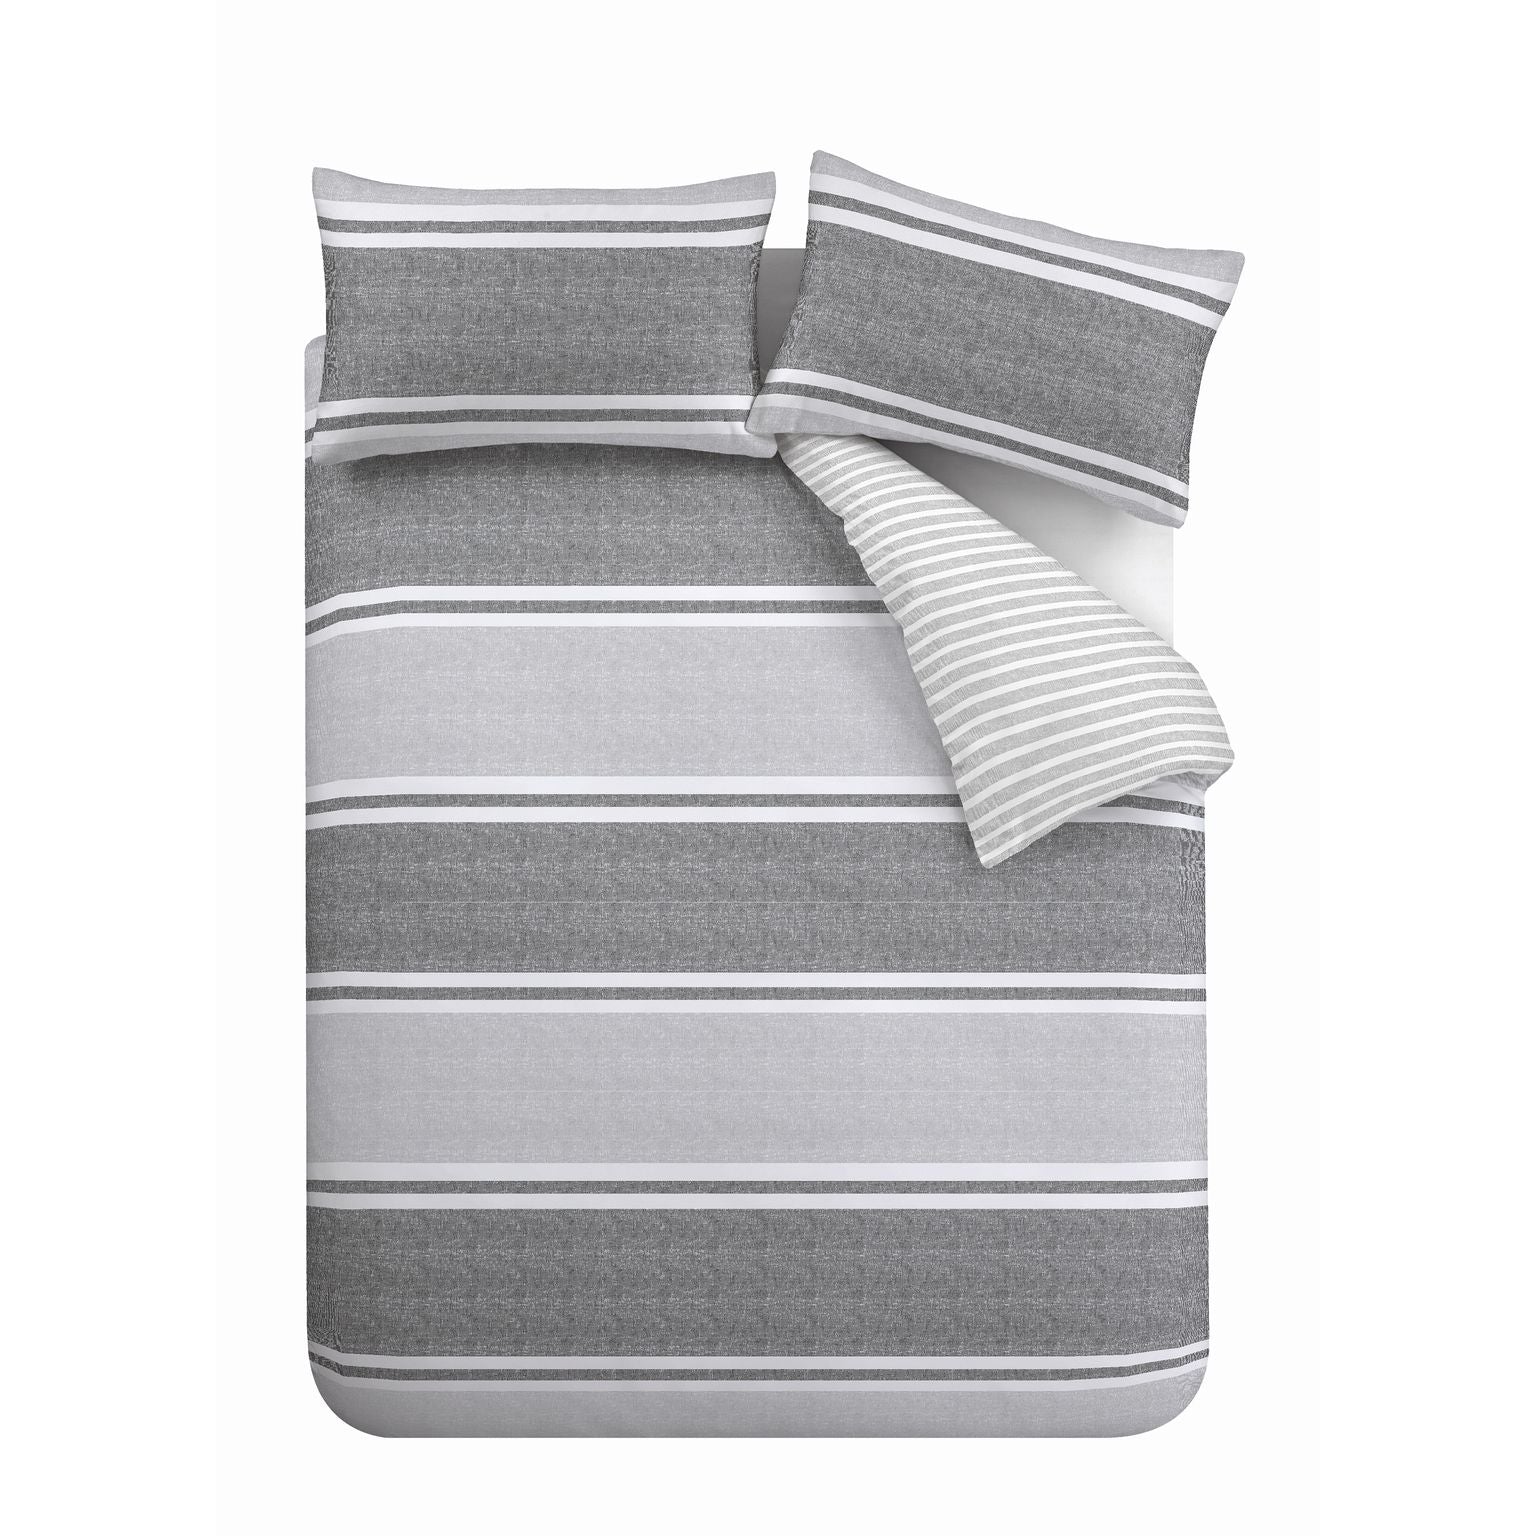 Textured Banded Stripe, Charcoal